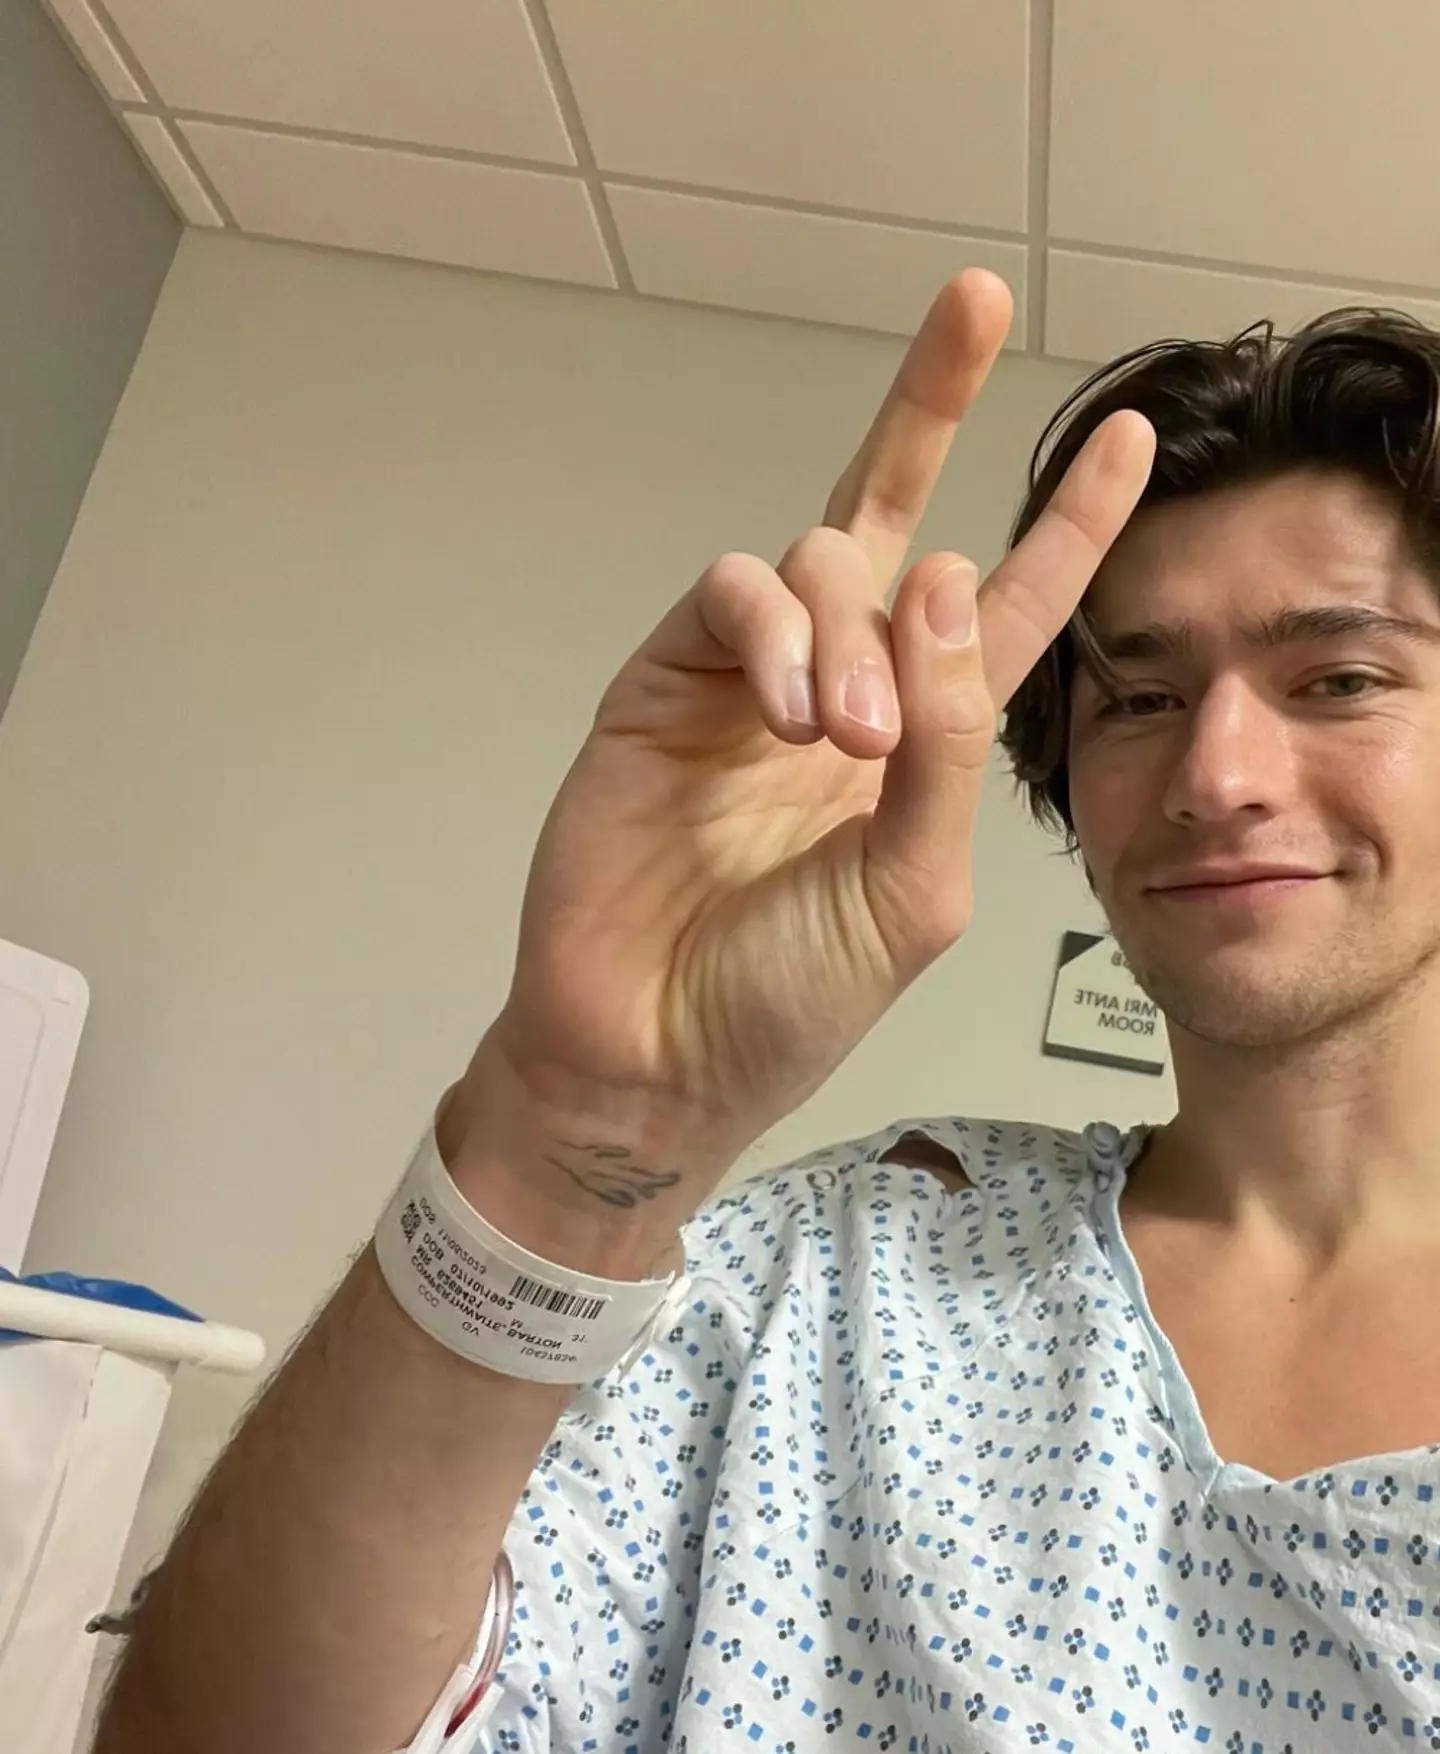 The actor took to Instagram to reveal his diagnosis to fans.